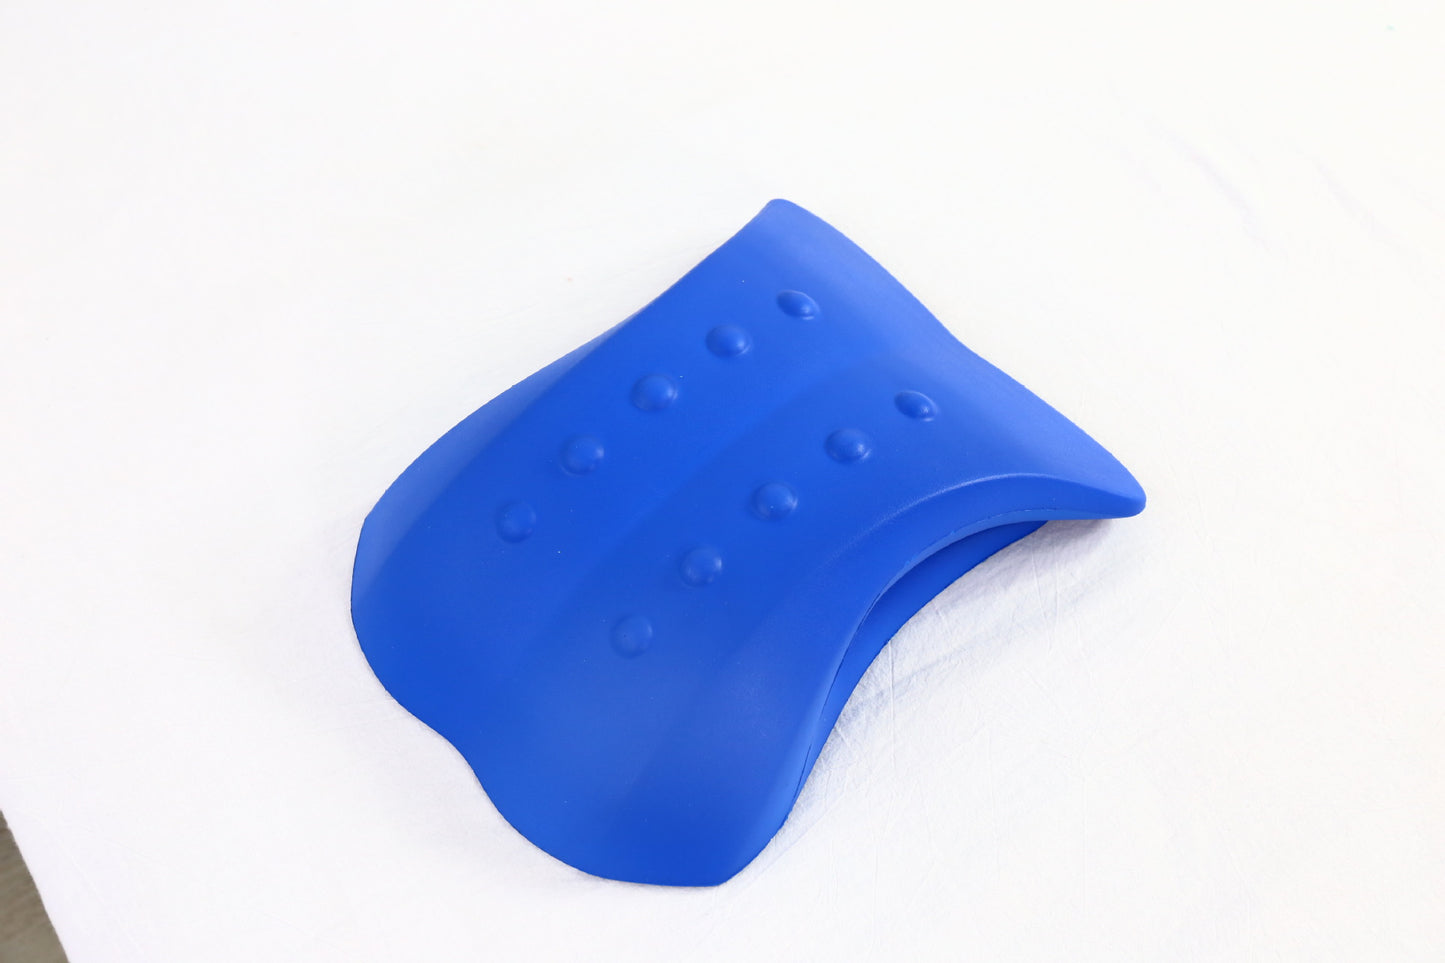 Lower Back Stretcher Device,Back Cracker Pillow, Spinal Deck Pain Relief ,Back Tension Relief,Lumbar Traction Cushion Suitable for Beginner 、Bed、Office、Car、Women、Men